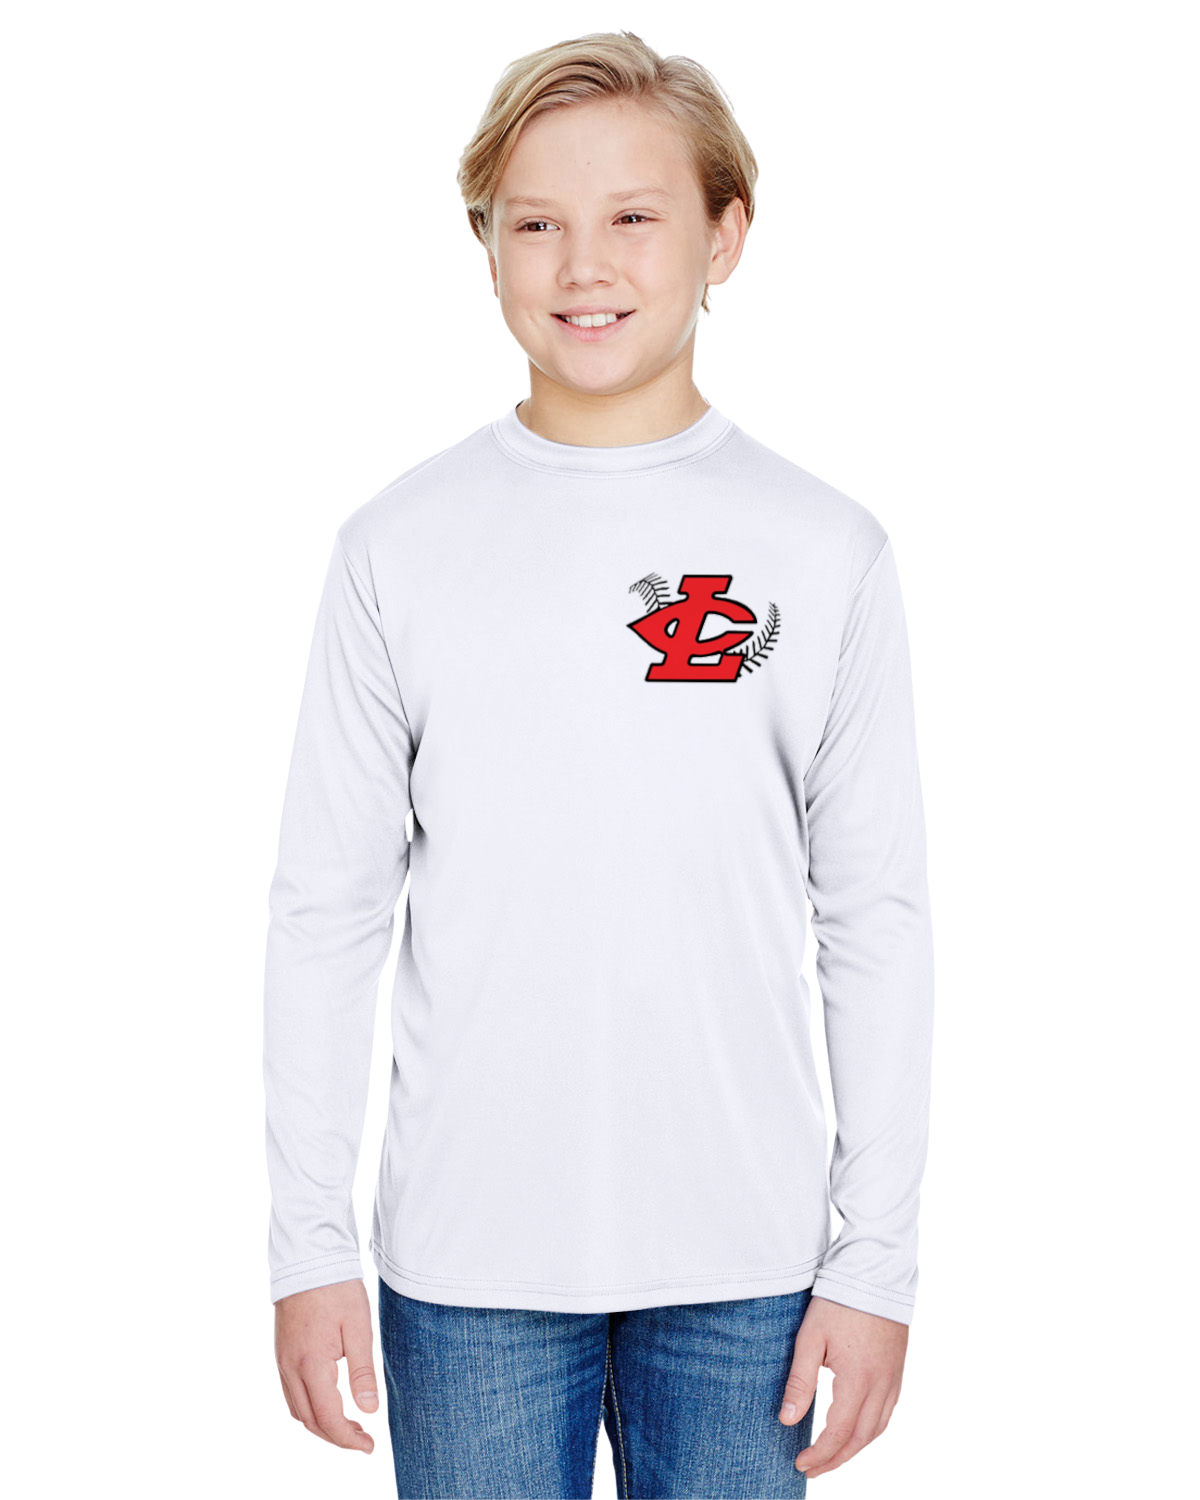 CLLL A4 Youth Cooling Performance Long Sleeve T-Shirt